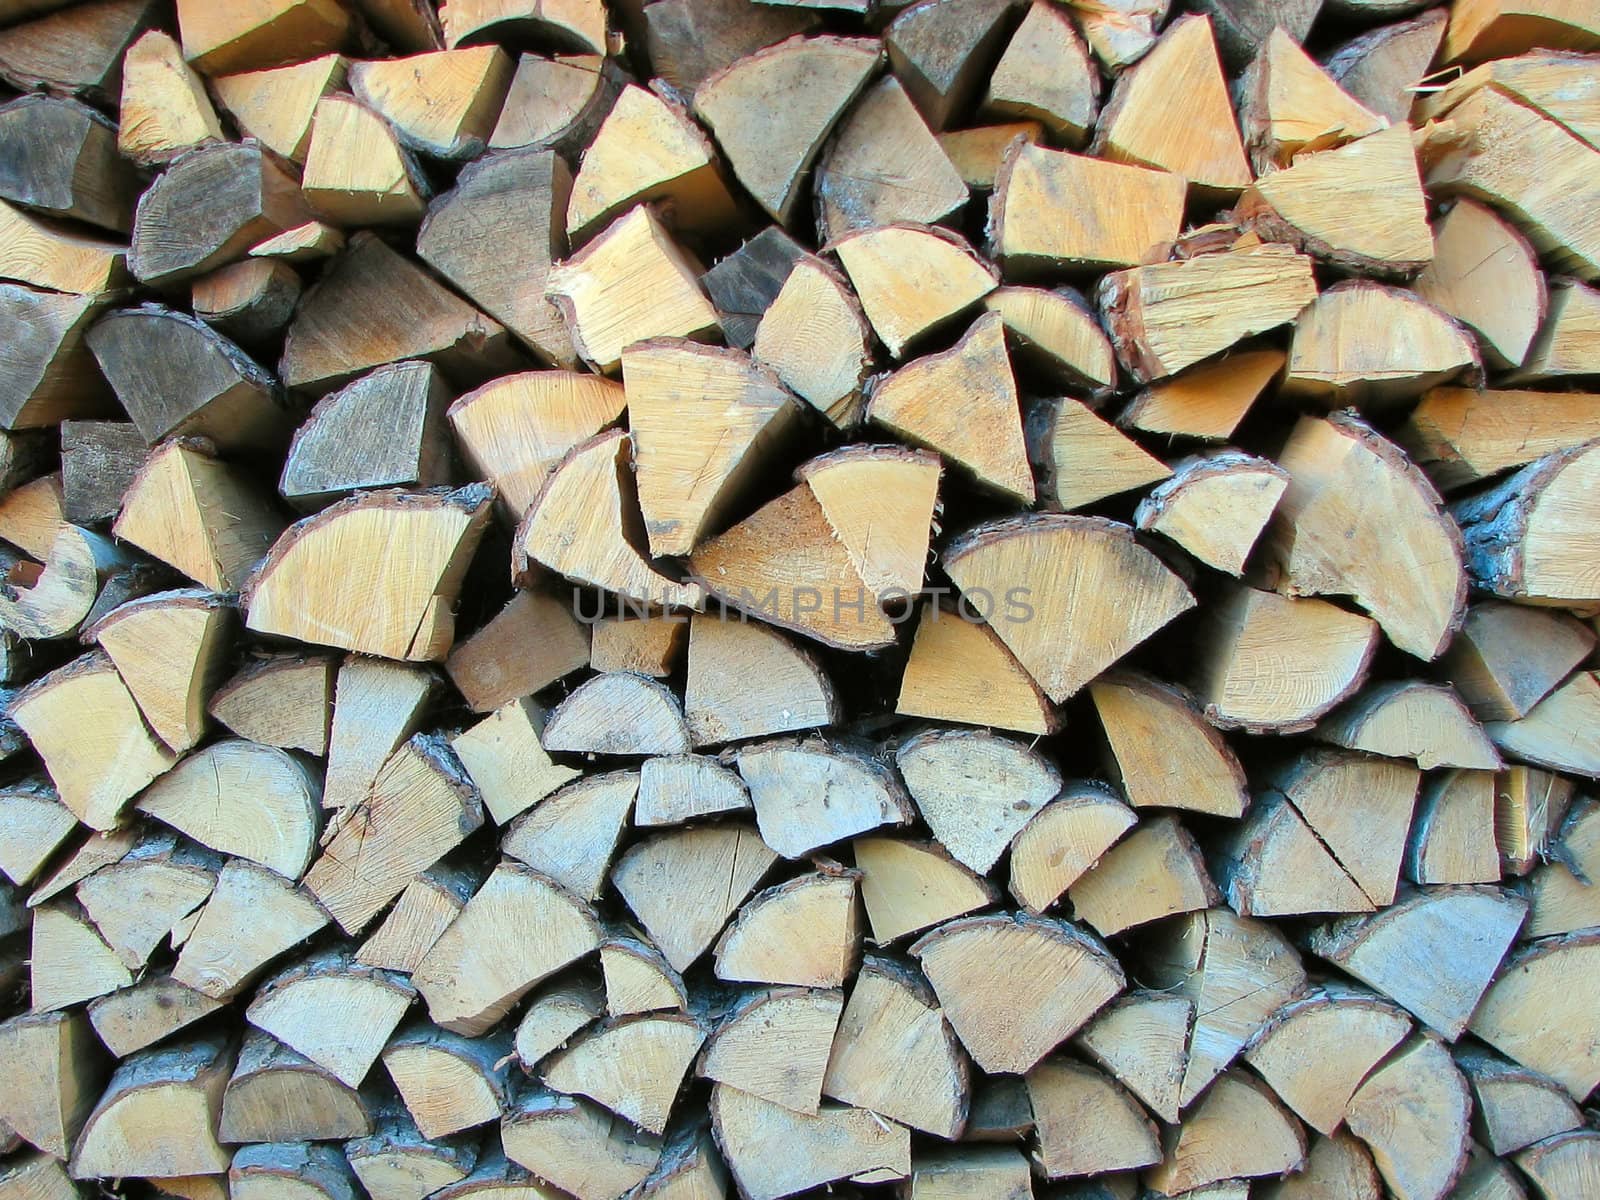 Wood Pile by vadimone